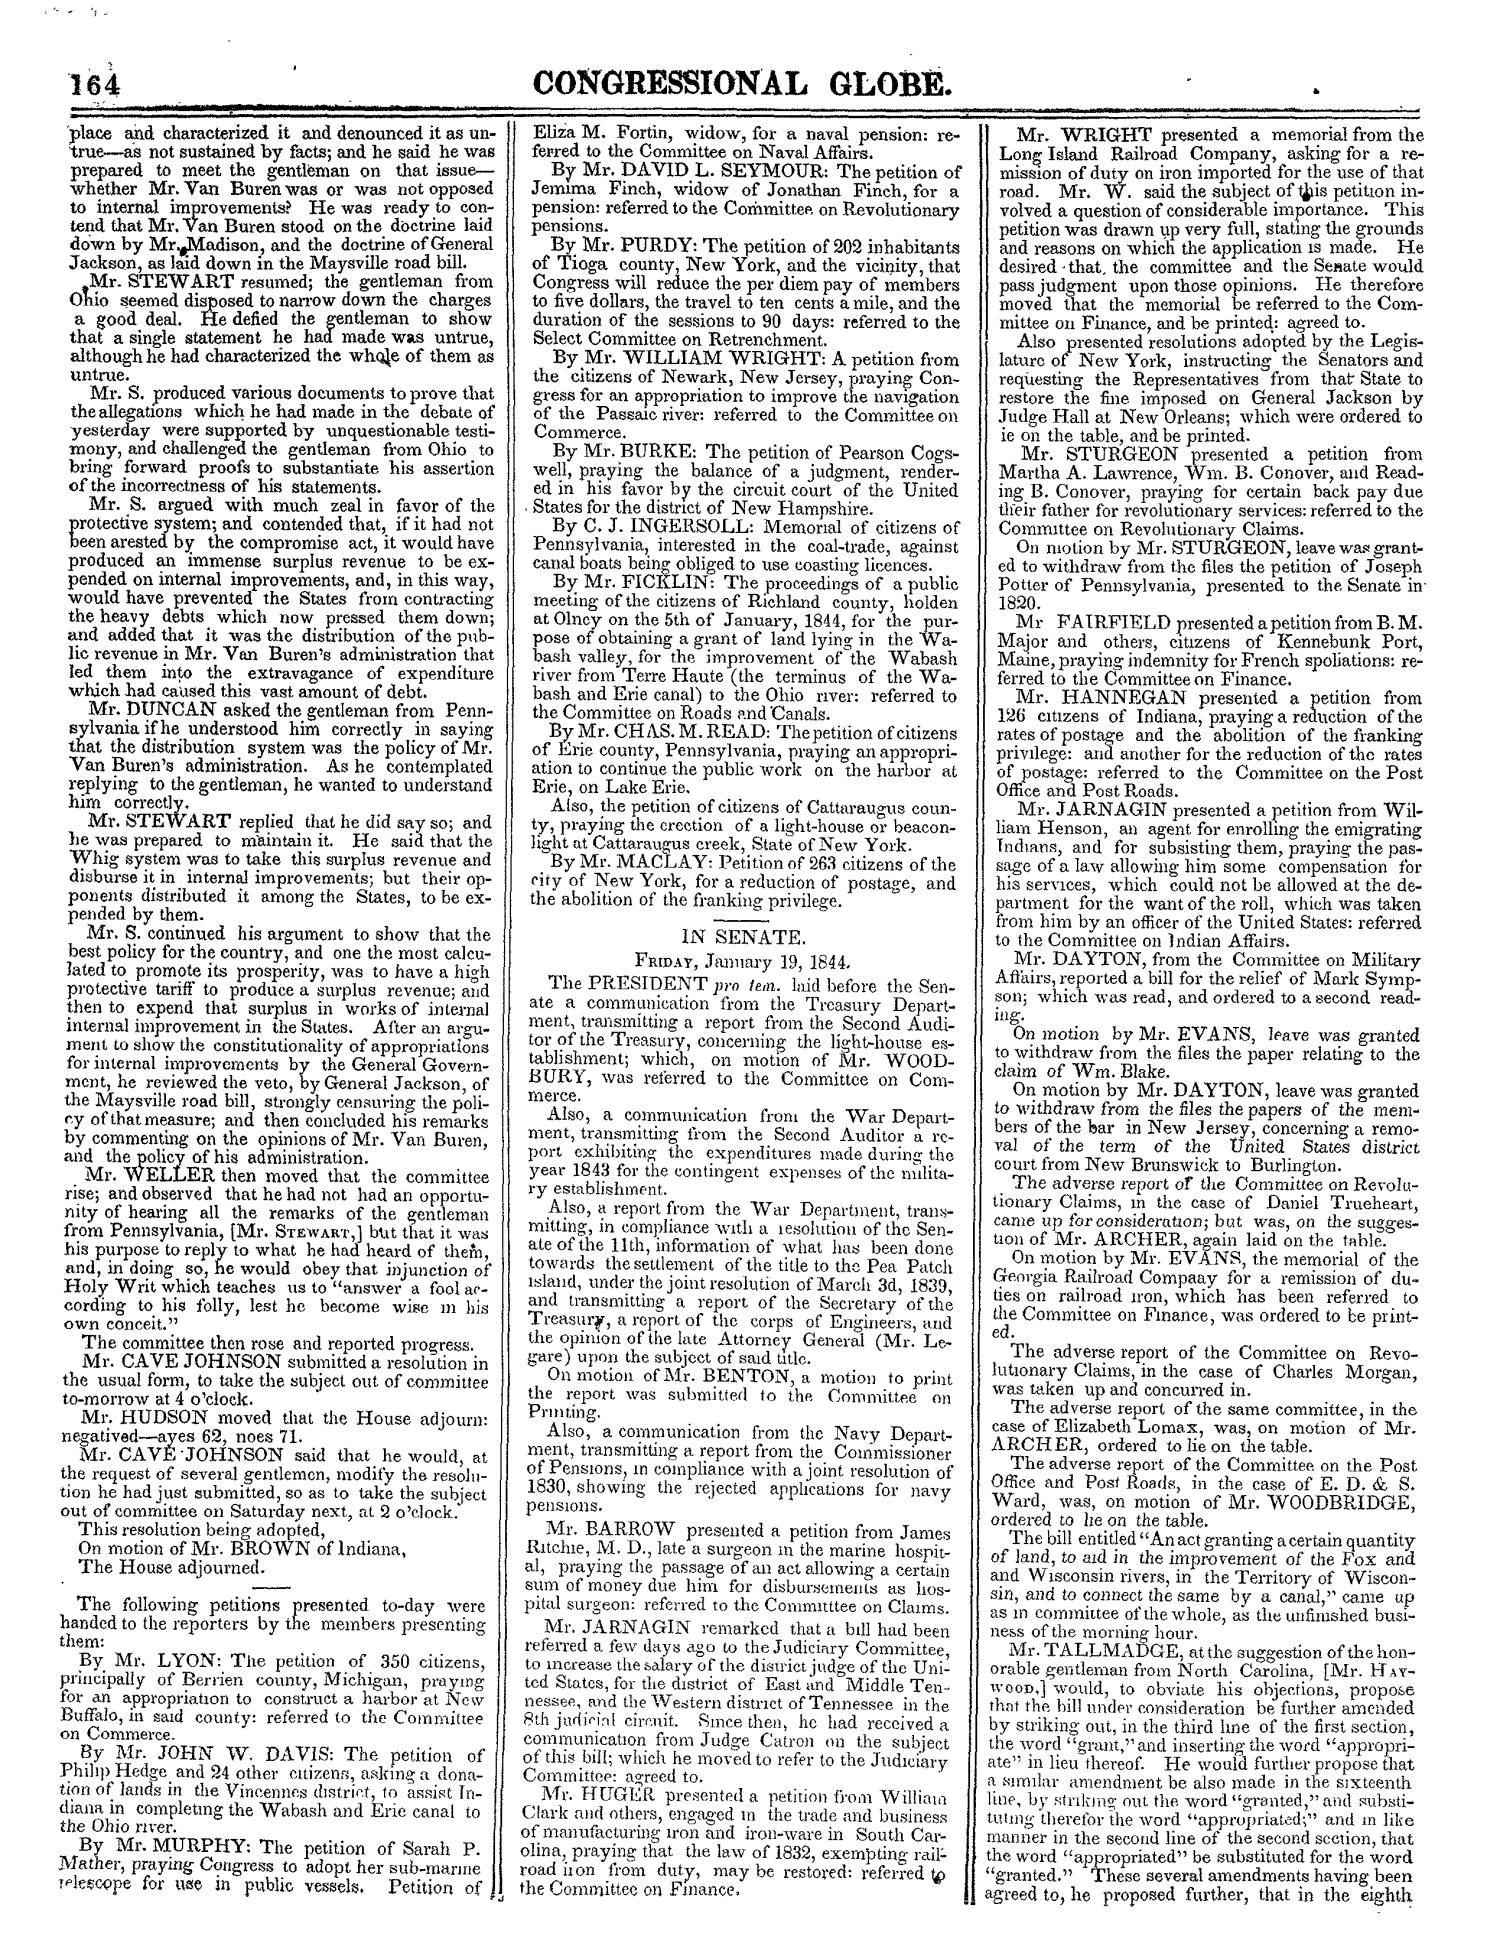 The Congressional Globe, Volume 13, Part 1: Twenty-Eighth Congress, First Session
                                                
                                                    164
                                                